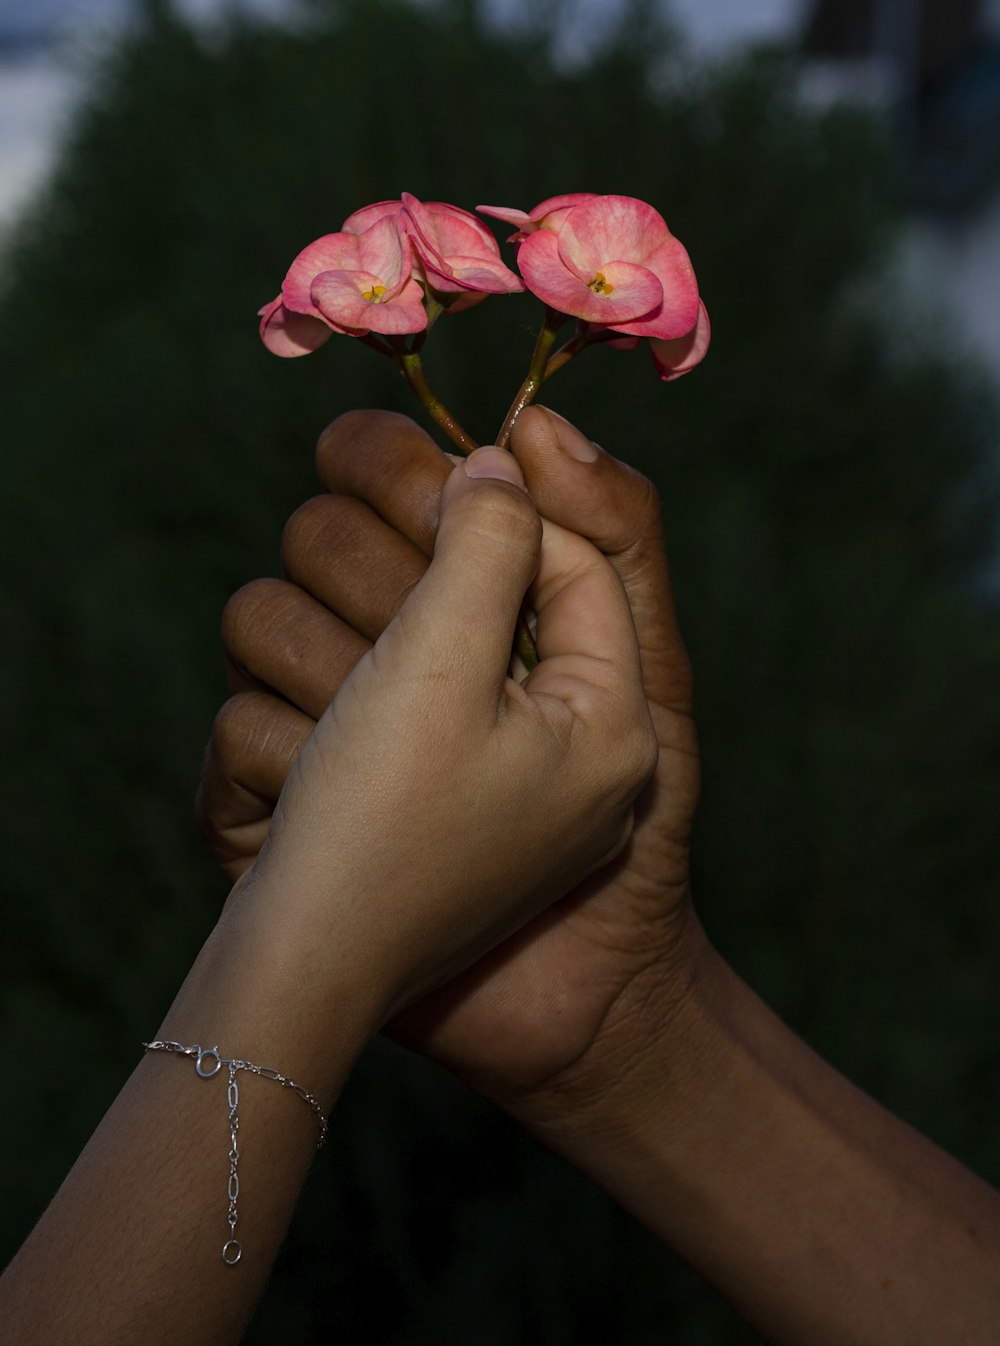 person holding pink rose flower